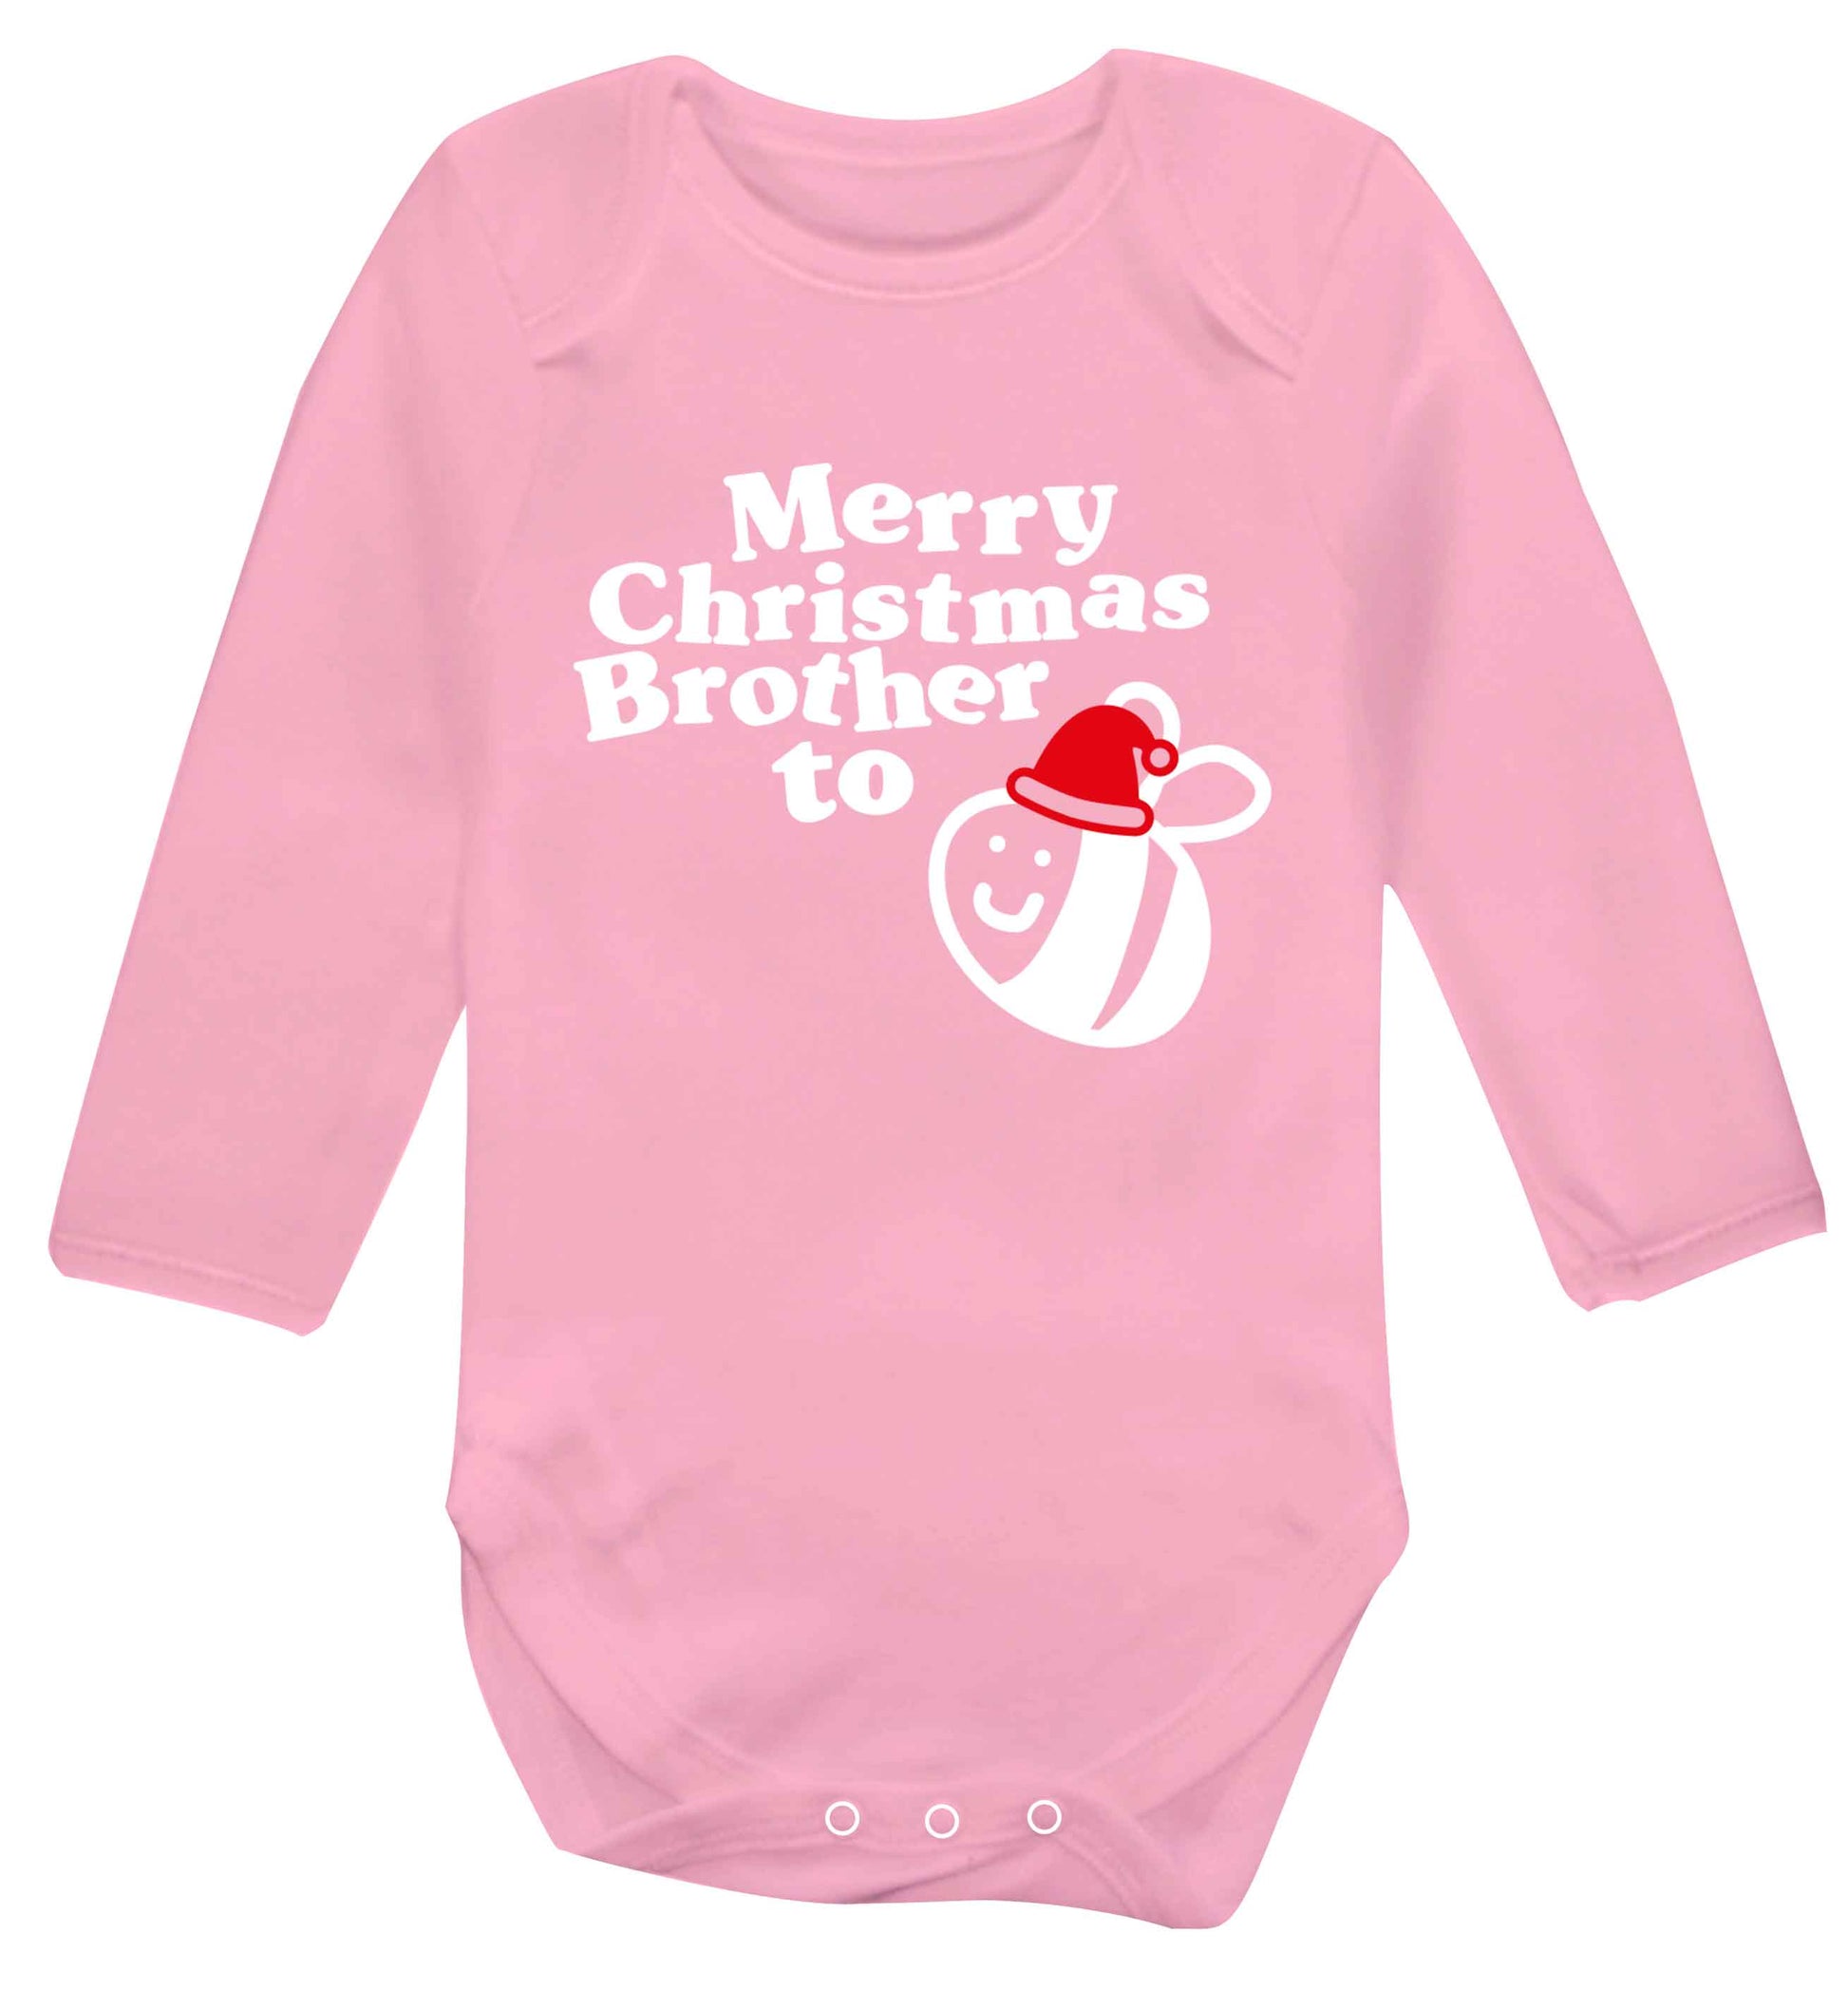 Merry Christmas brother to be Baby Vest long sleeved pale pink 6-12 months